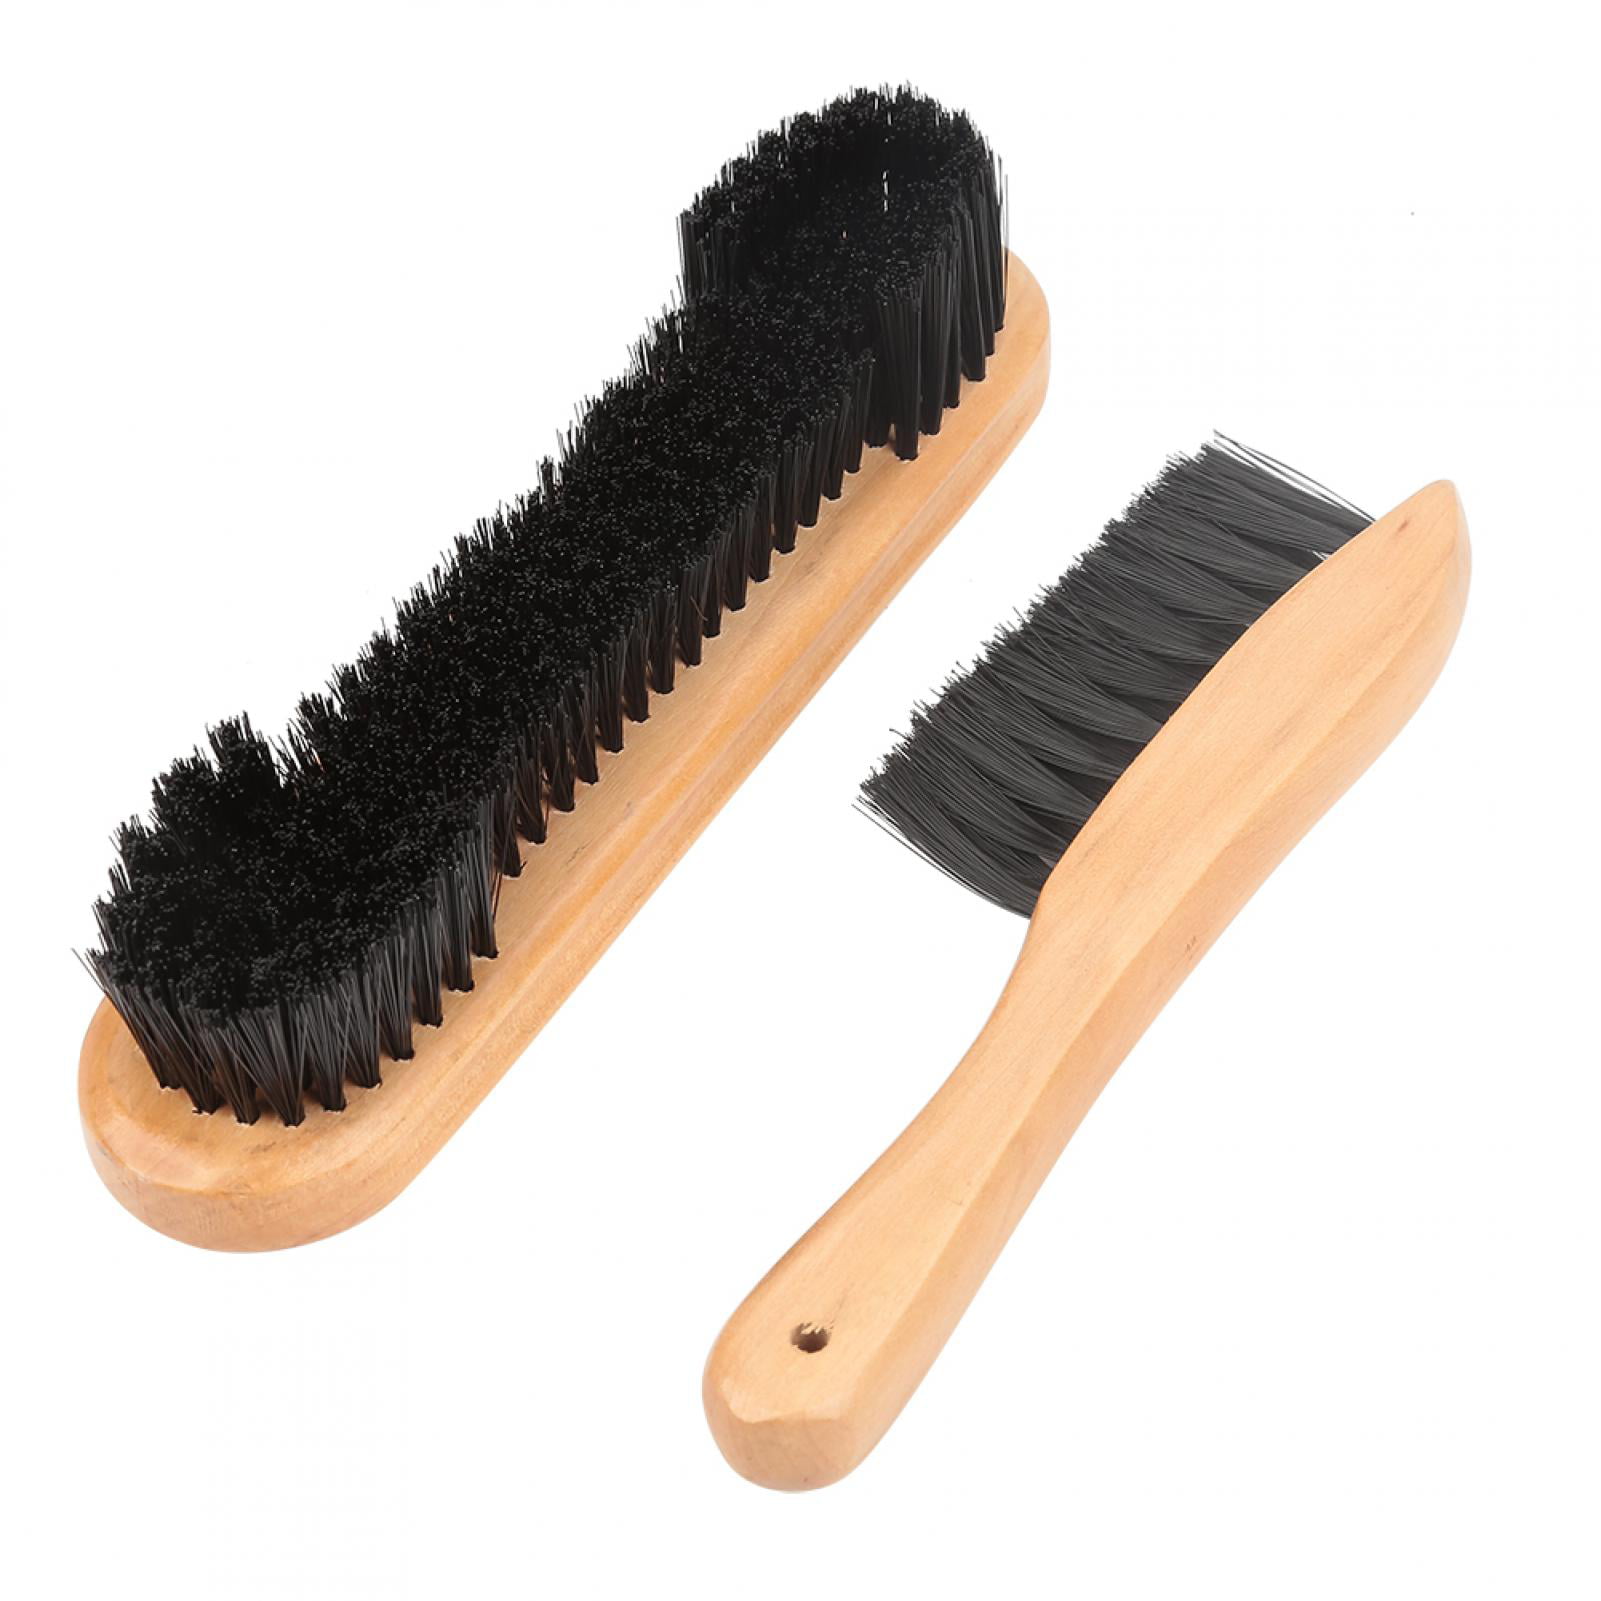 LANWF Billiard Table Brush Wooden Cleaner Billiard Pool Table Cleaning Durable Tool Accessories,2#